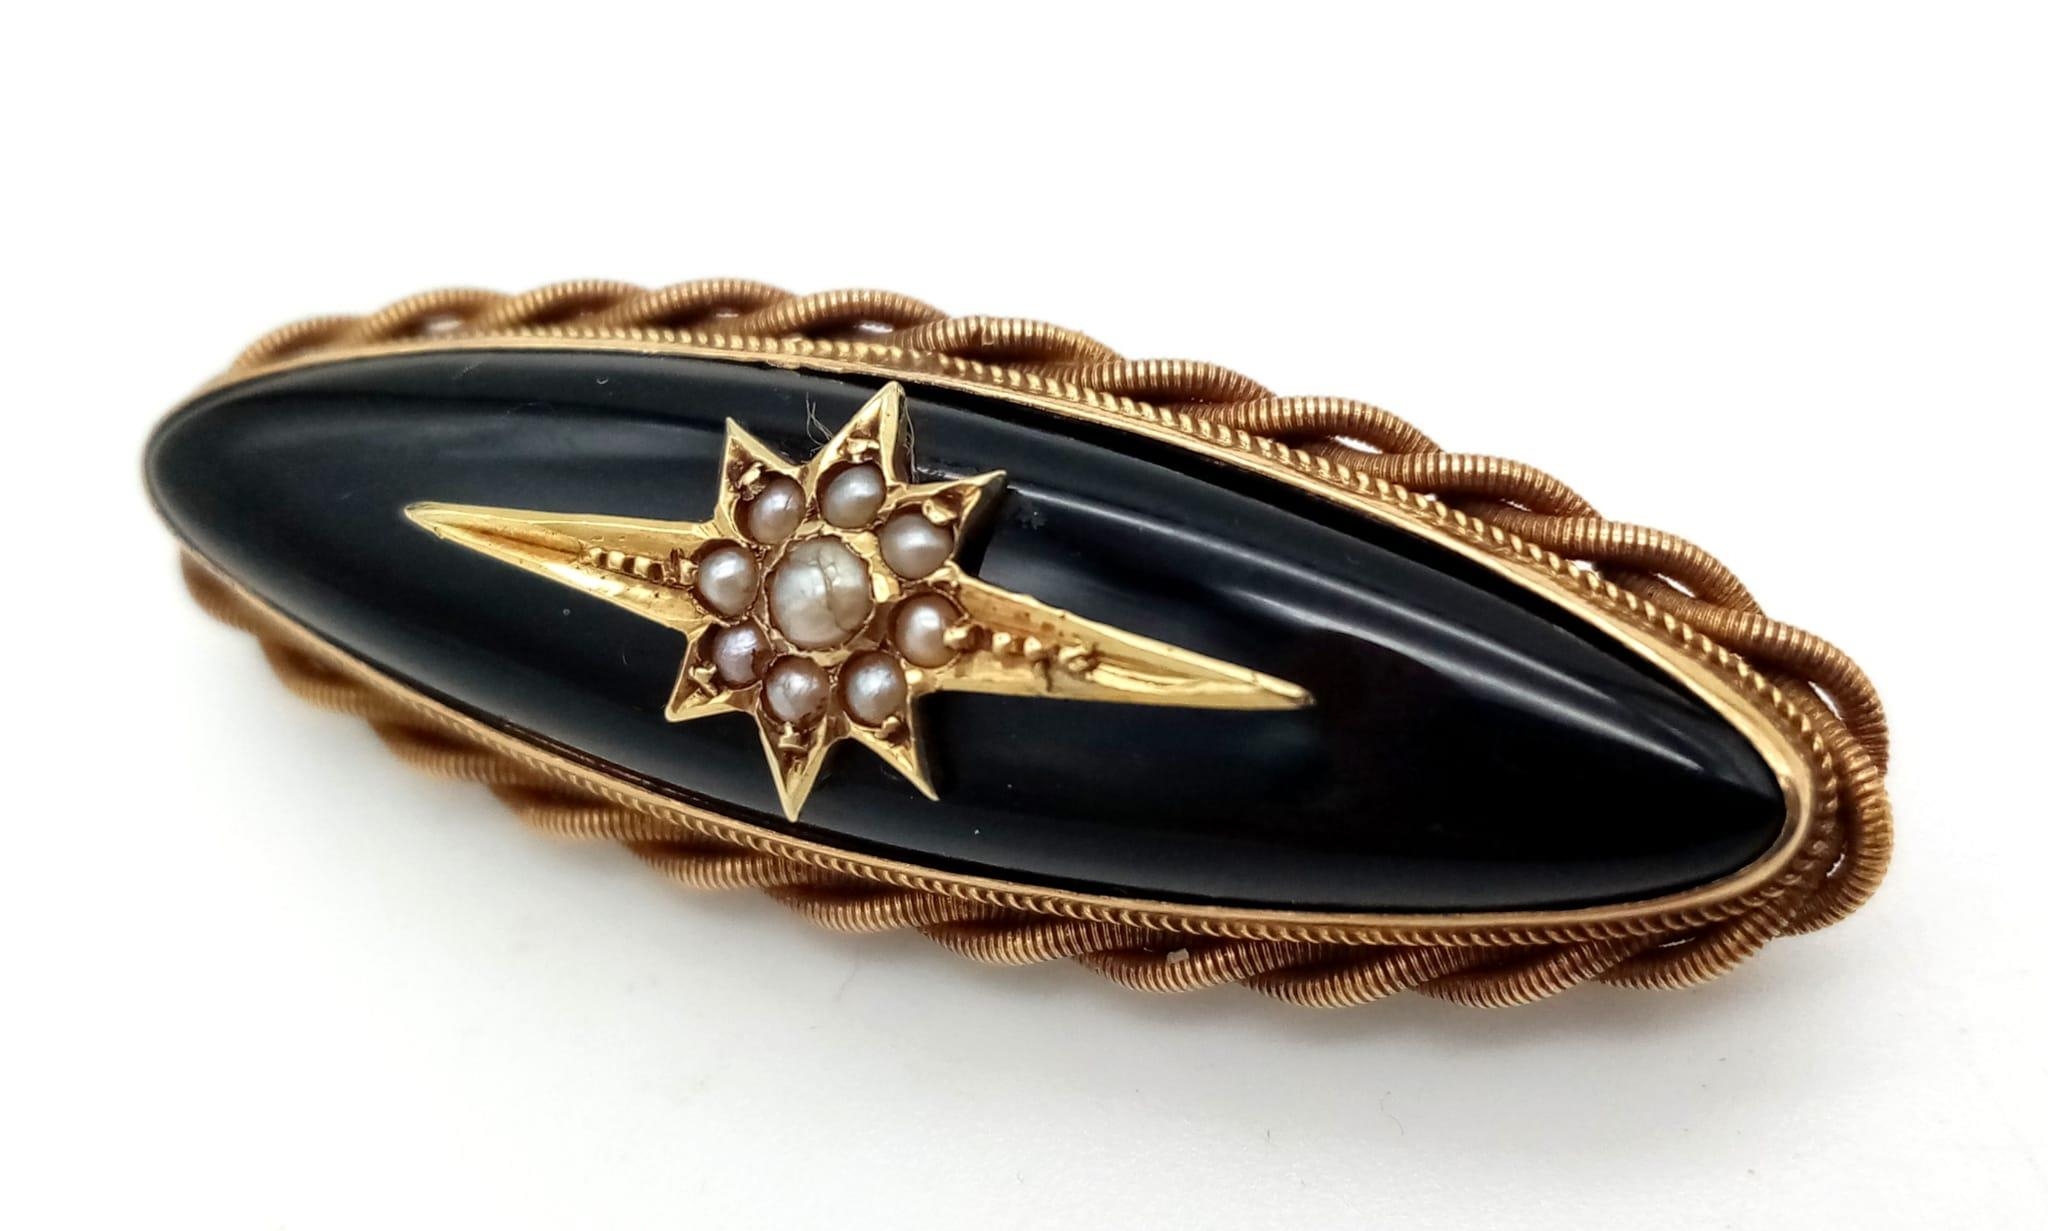 12k yellow gold brooch with black inlay and set with 9 seed pearls weighs 6.7g